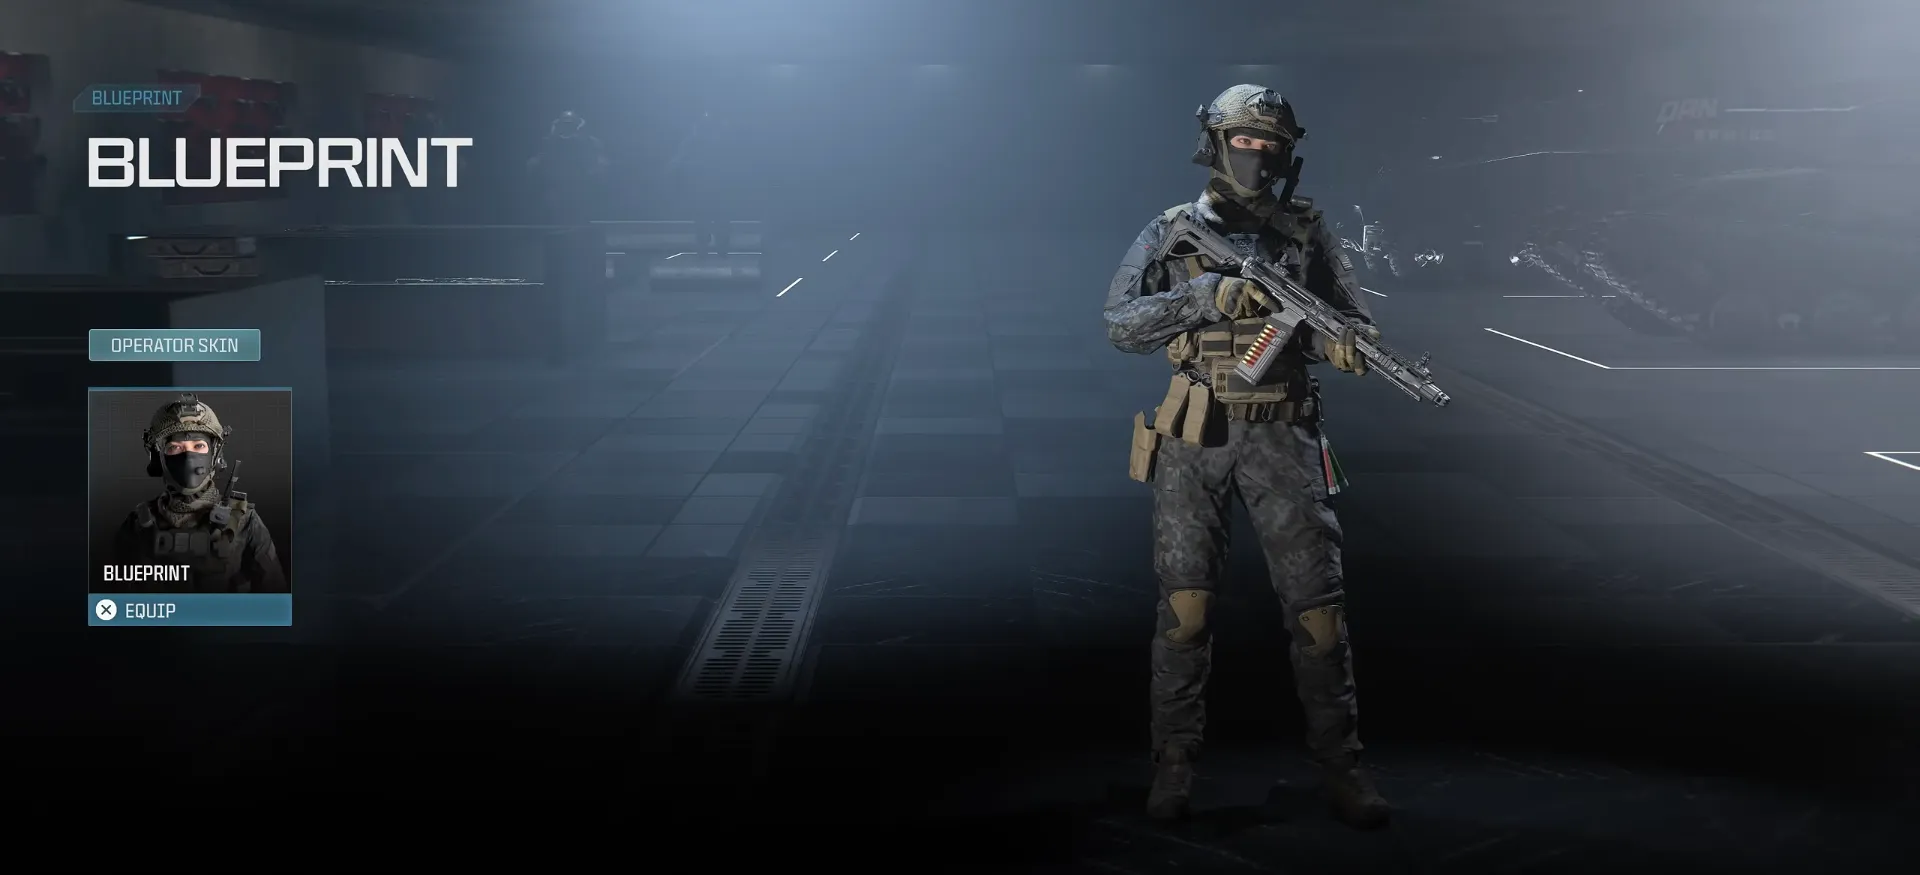 An Operator Skin, a Weapon Blueprint, and More, Get These Lucrative Rewards  in the Call of Duty: Modern Warfare 3 Beta - EssentiallySports